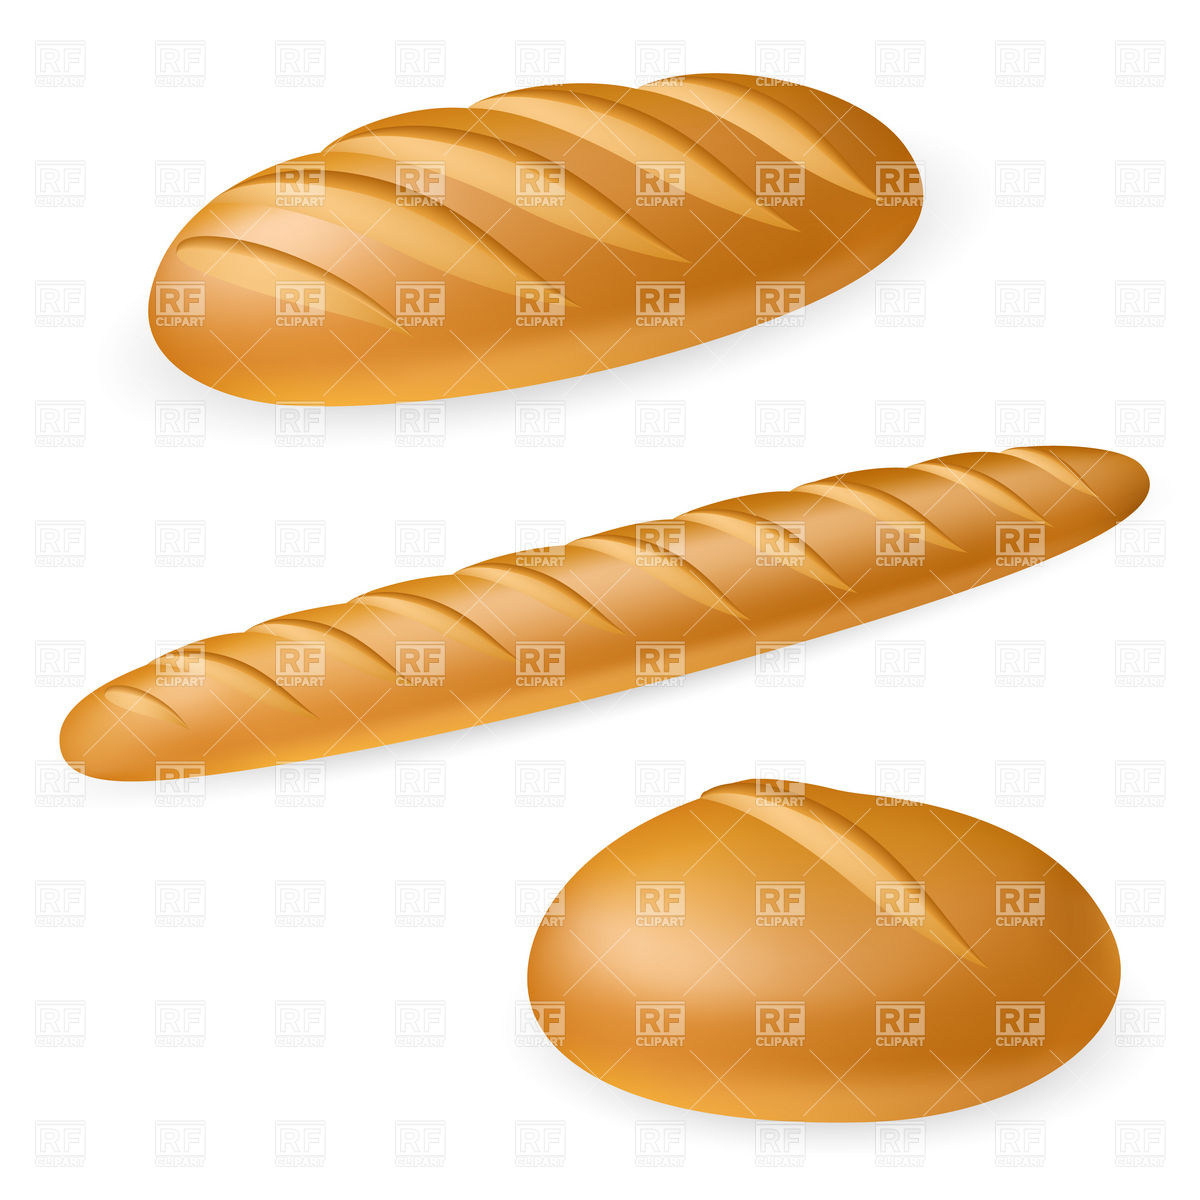 White Bread   Long Loaf Download Royalty Free Vector Clipart  Eps